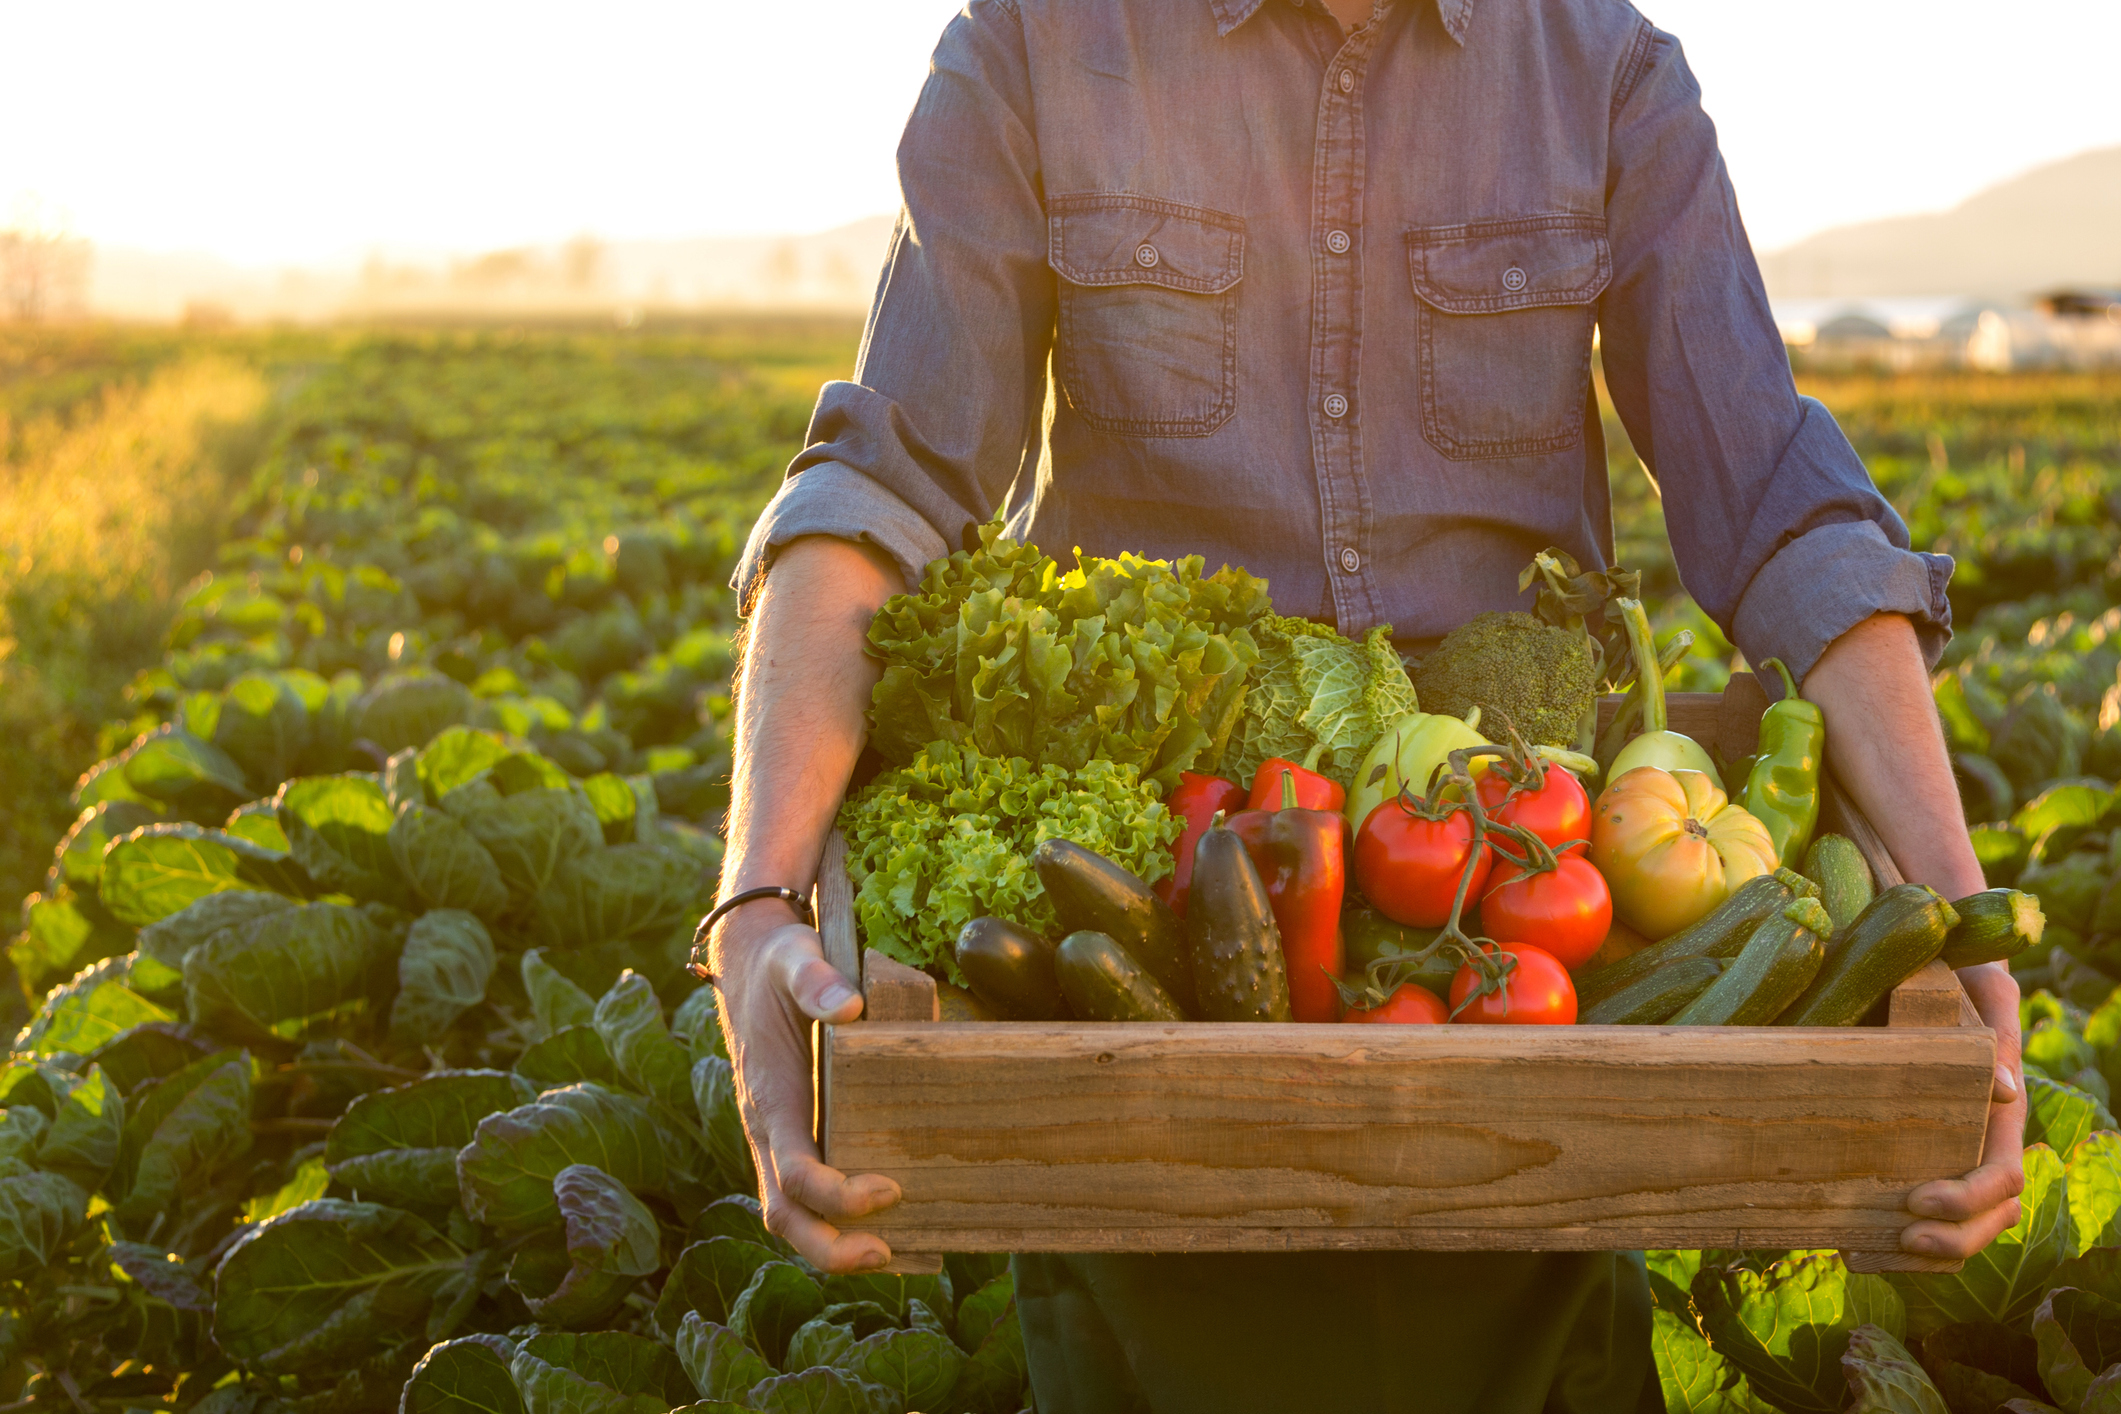 In a long-term survival situation, knowing how to grow your own food may be essential. 